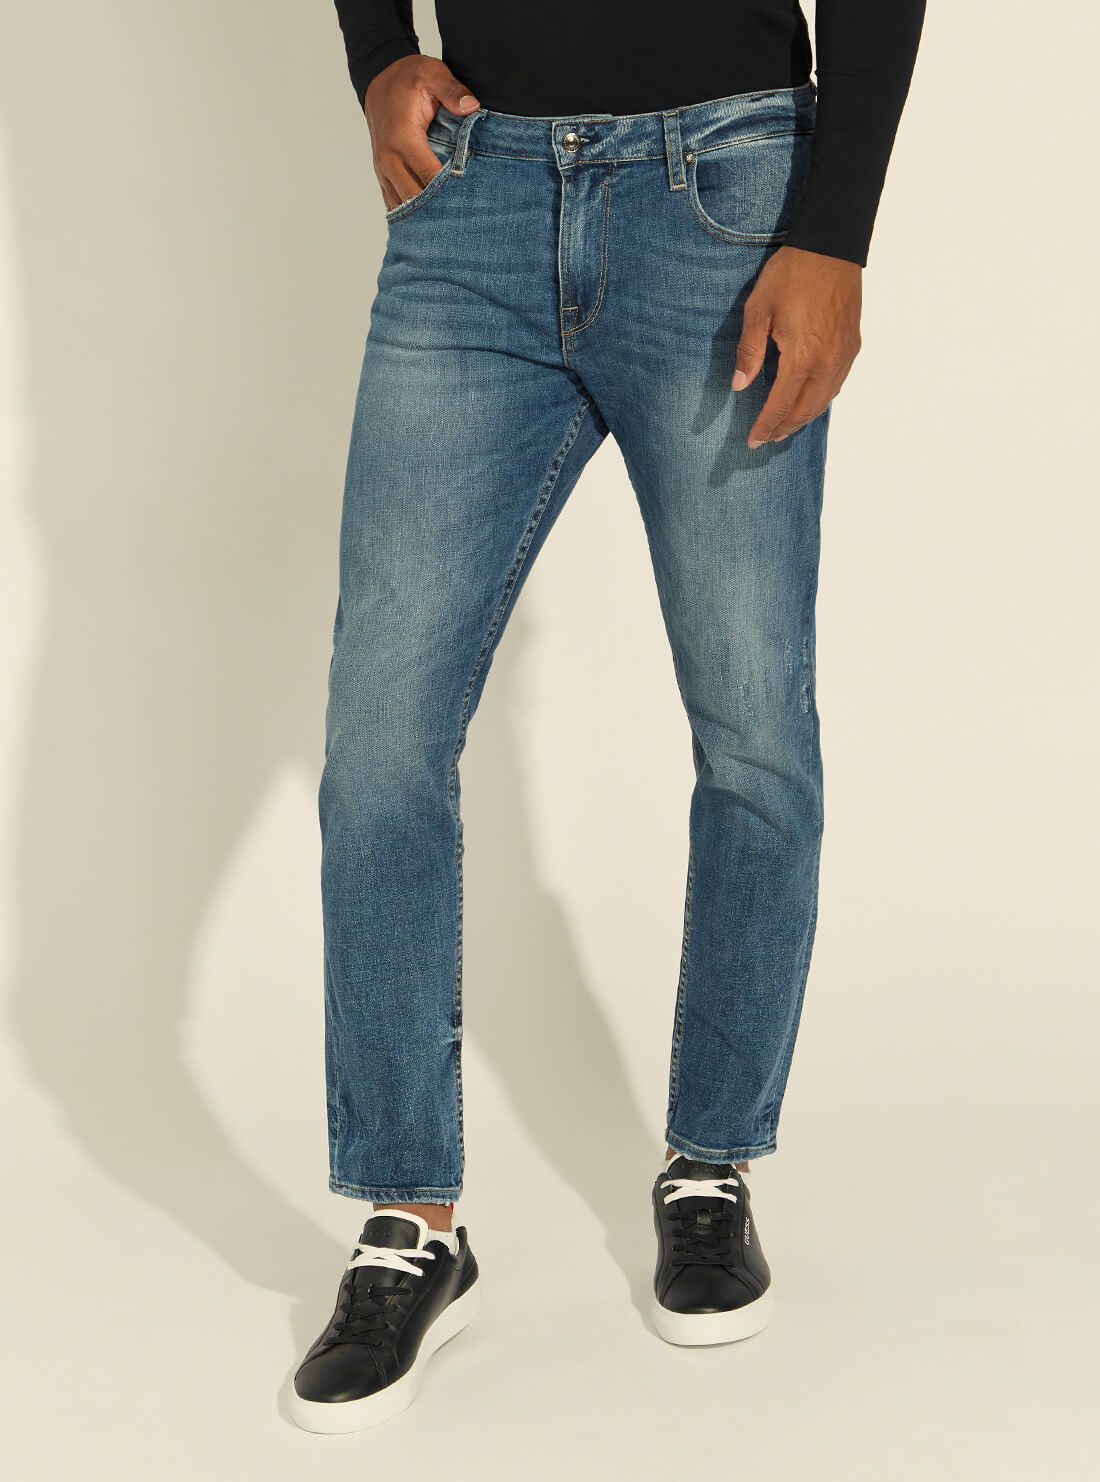 GUESS Mens Mid-Rise Athletic Tapered Denim Jeans in Union Wash MBRAR53041B Front View